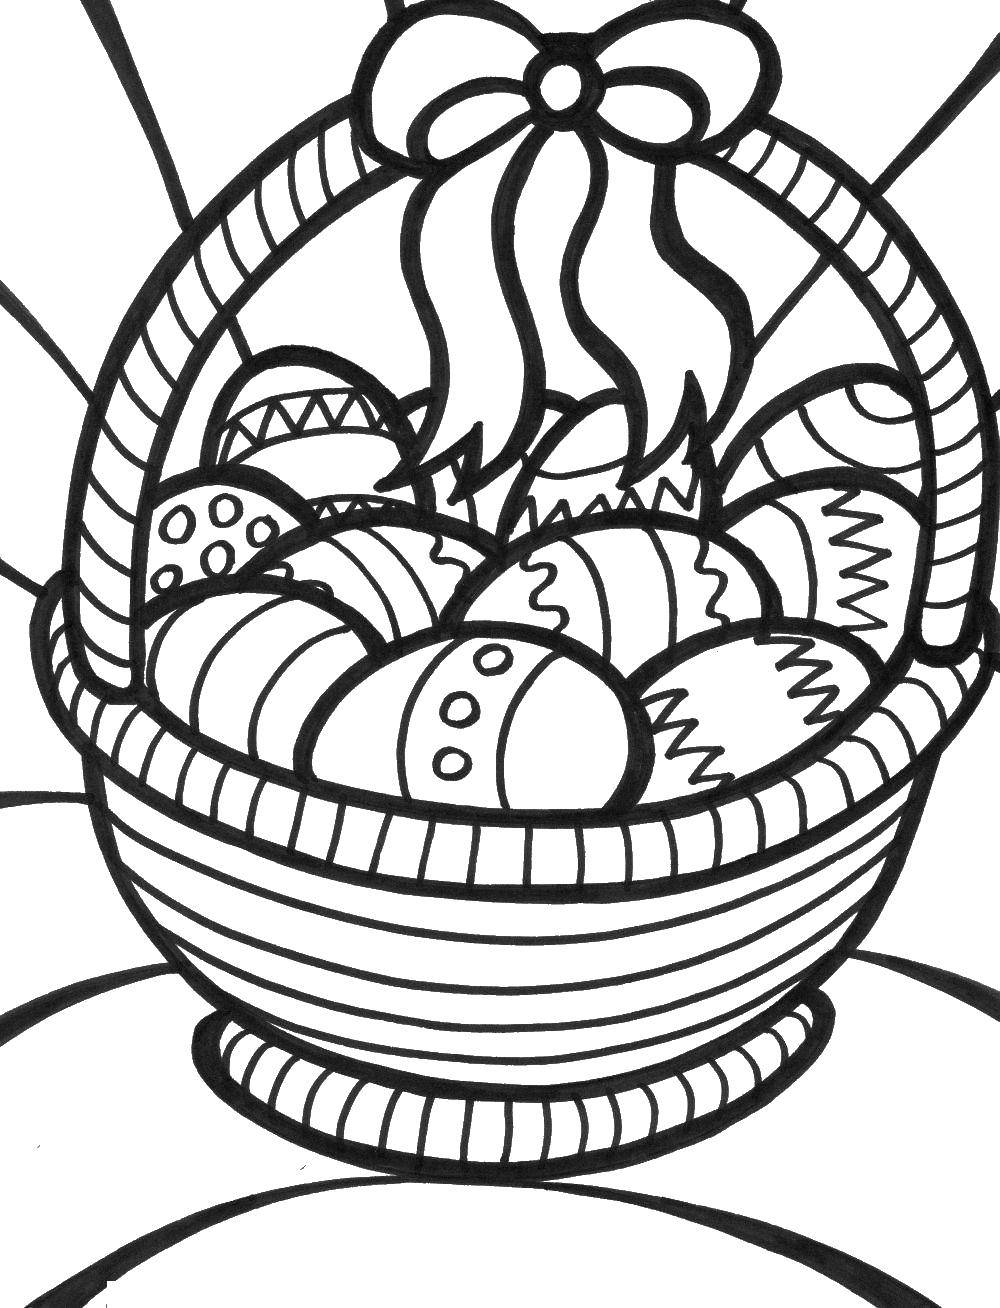 Coloring Basket with eggs. Category Easter eggs. Tags:  basket , bow, eggs.